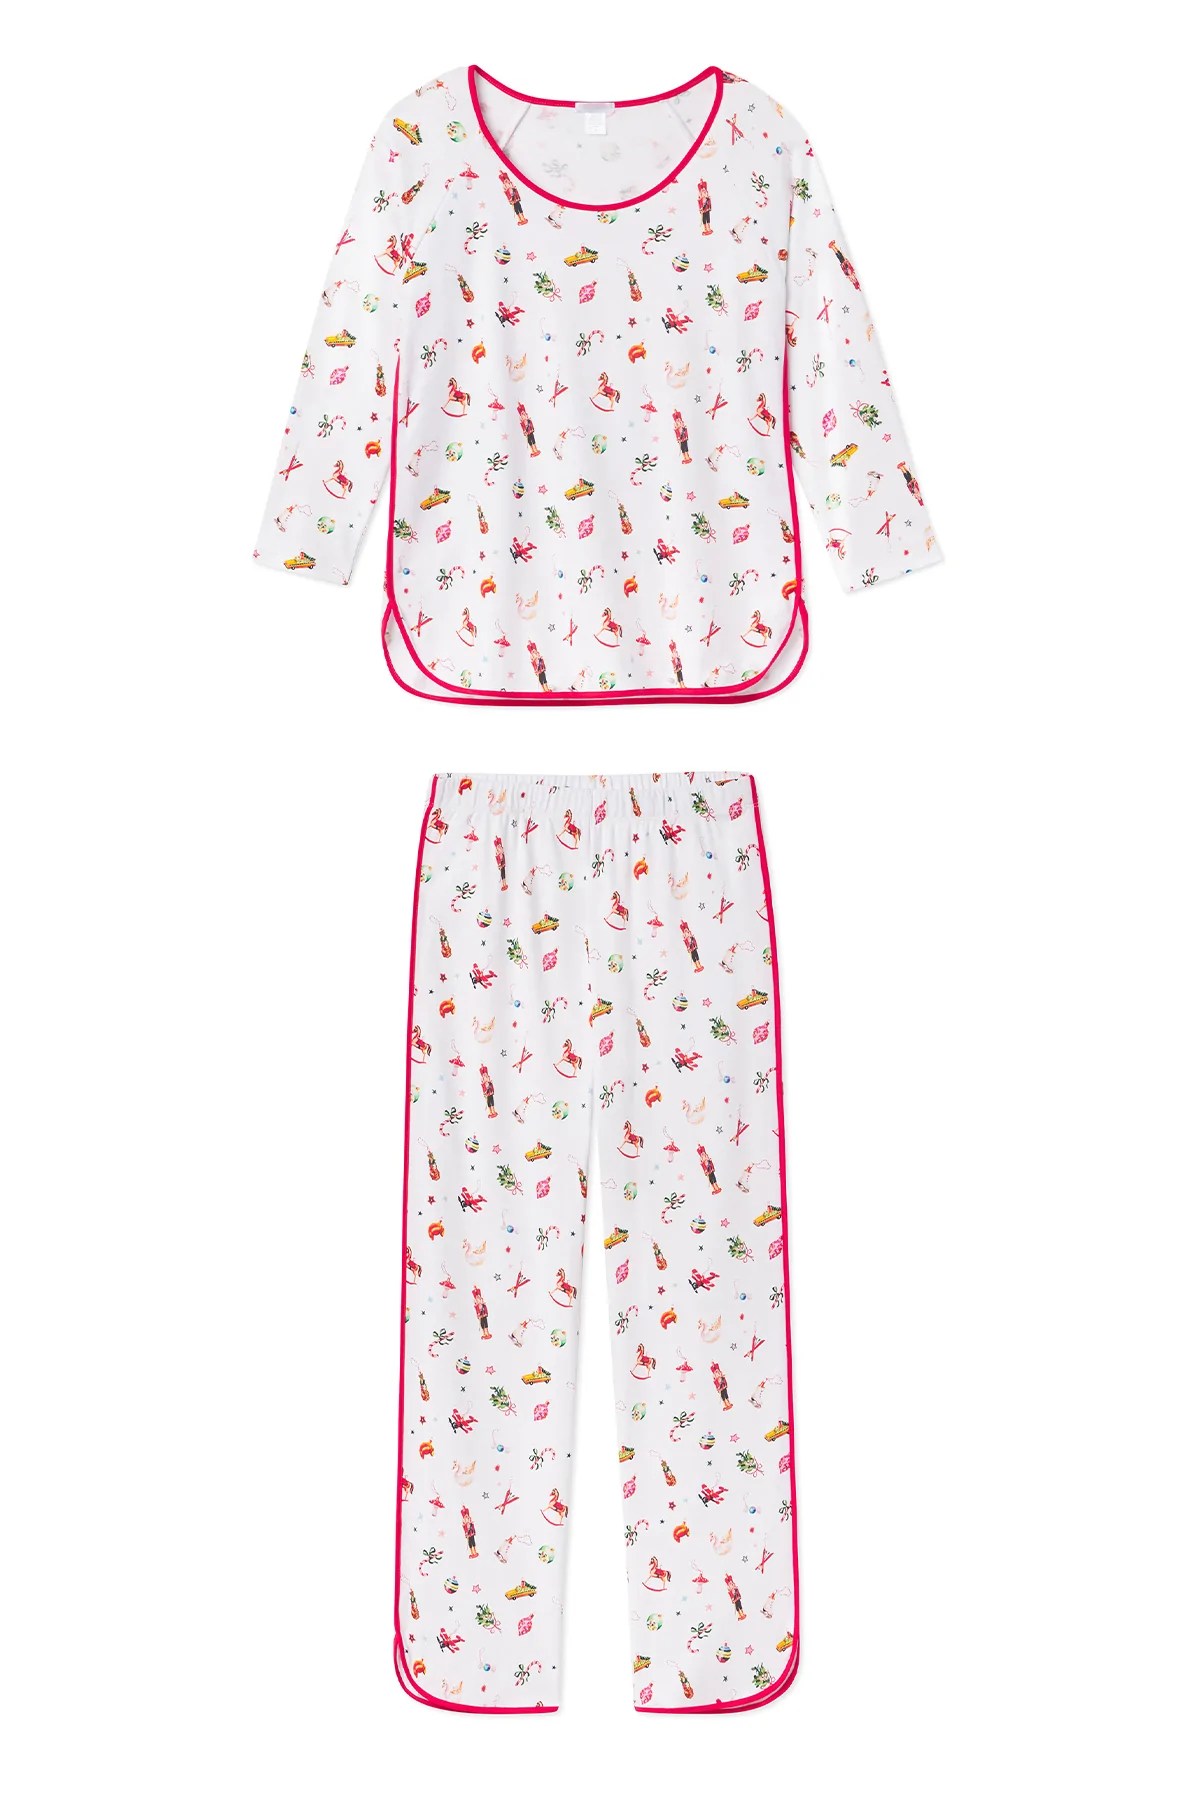 ornaments pants pajama set from the lake black friday sale on a white background